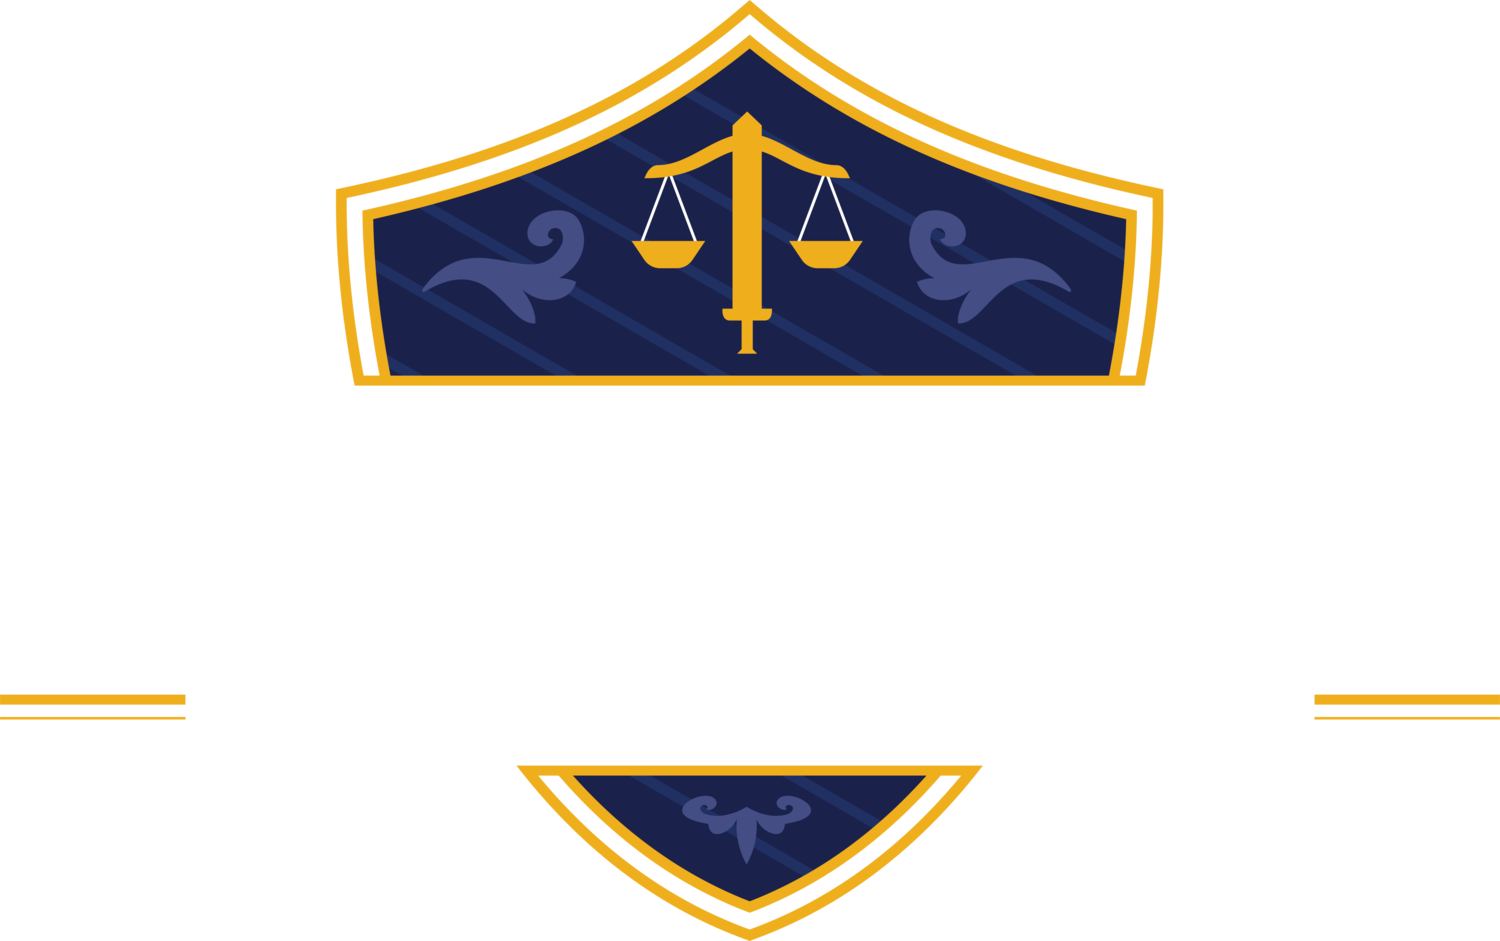 Stalwart Paralegal Solutions